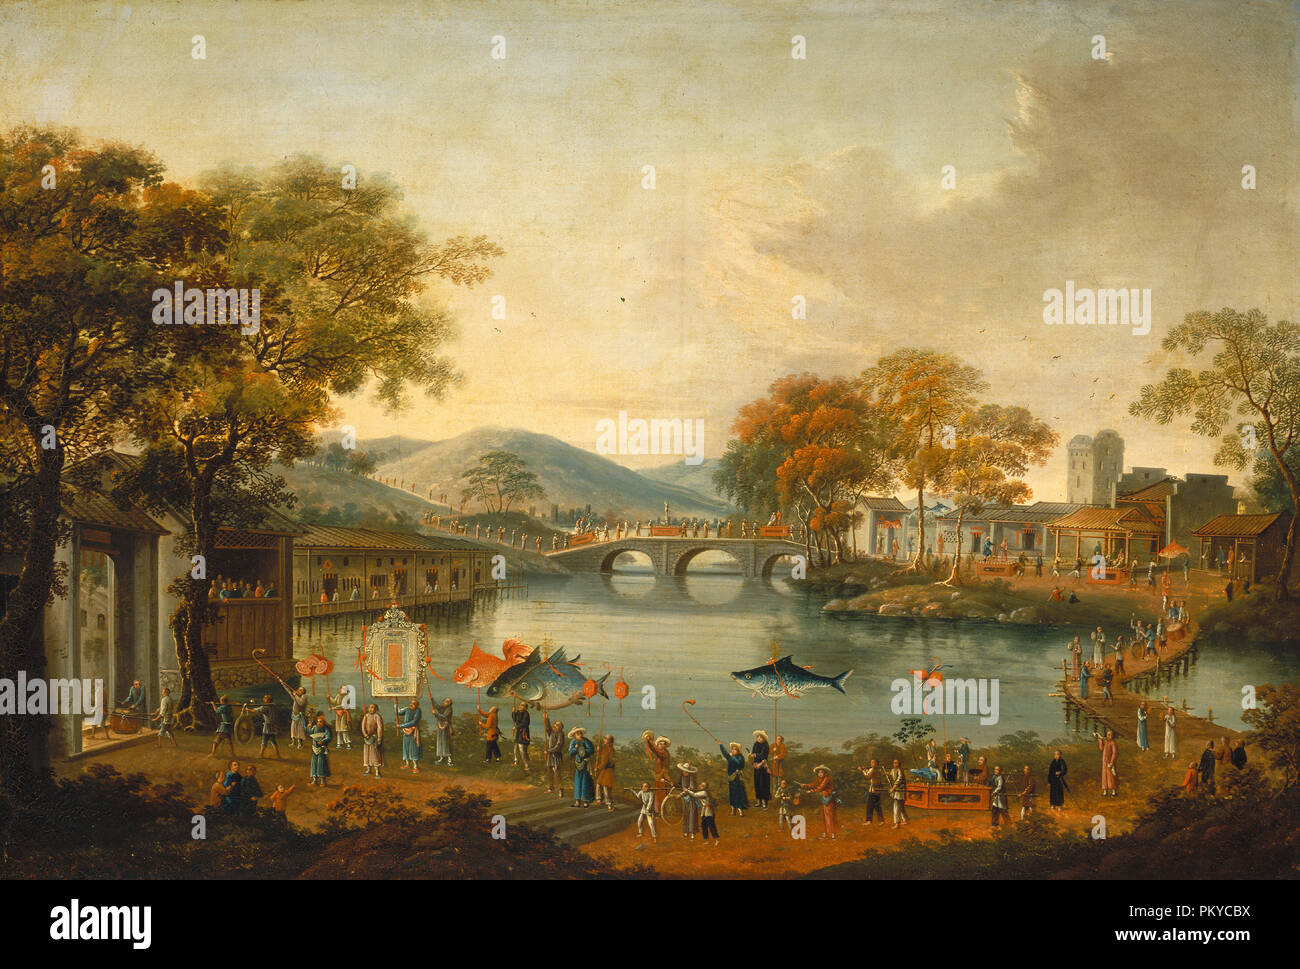 Procession by a Lake. Dated: 19th century. Dimensions: overall: 76.2 x 111.8 cm (30 x 44 in.)  framed: 92.7 x 128.3 x 5.1 cm (36 1/2 x 50 1/2 x 2 in.). Medium: oil on fabric. Museum: National Gallery of Art, Washington DC. Author: Chinese Qing Dynasty. Stock Photo